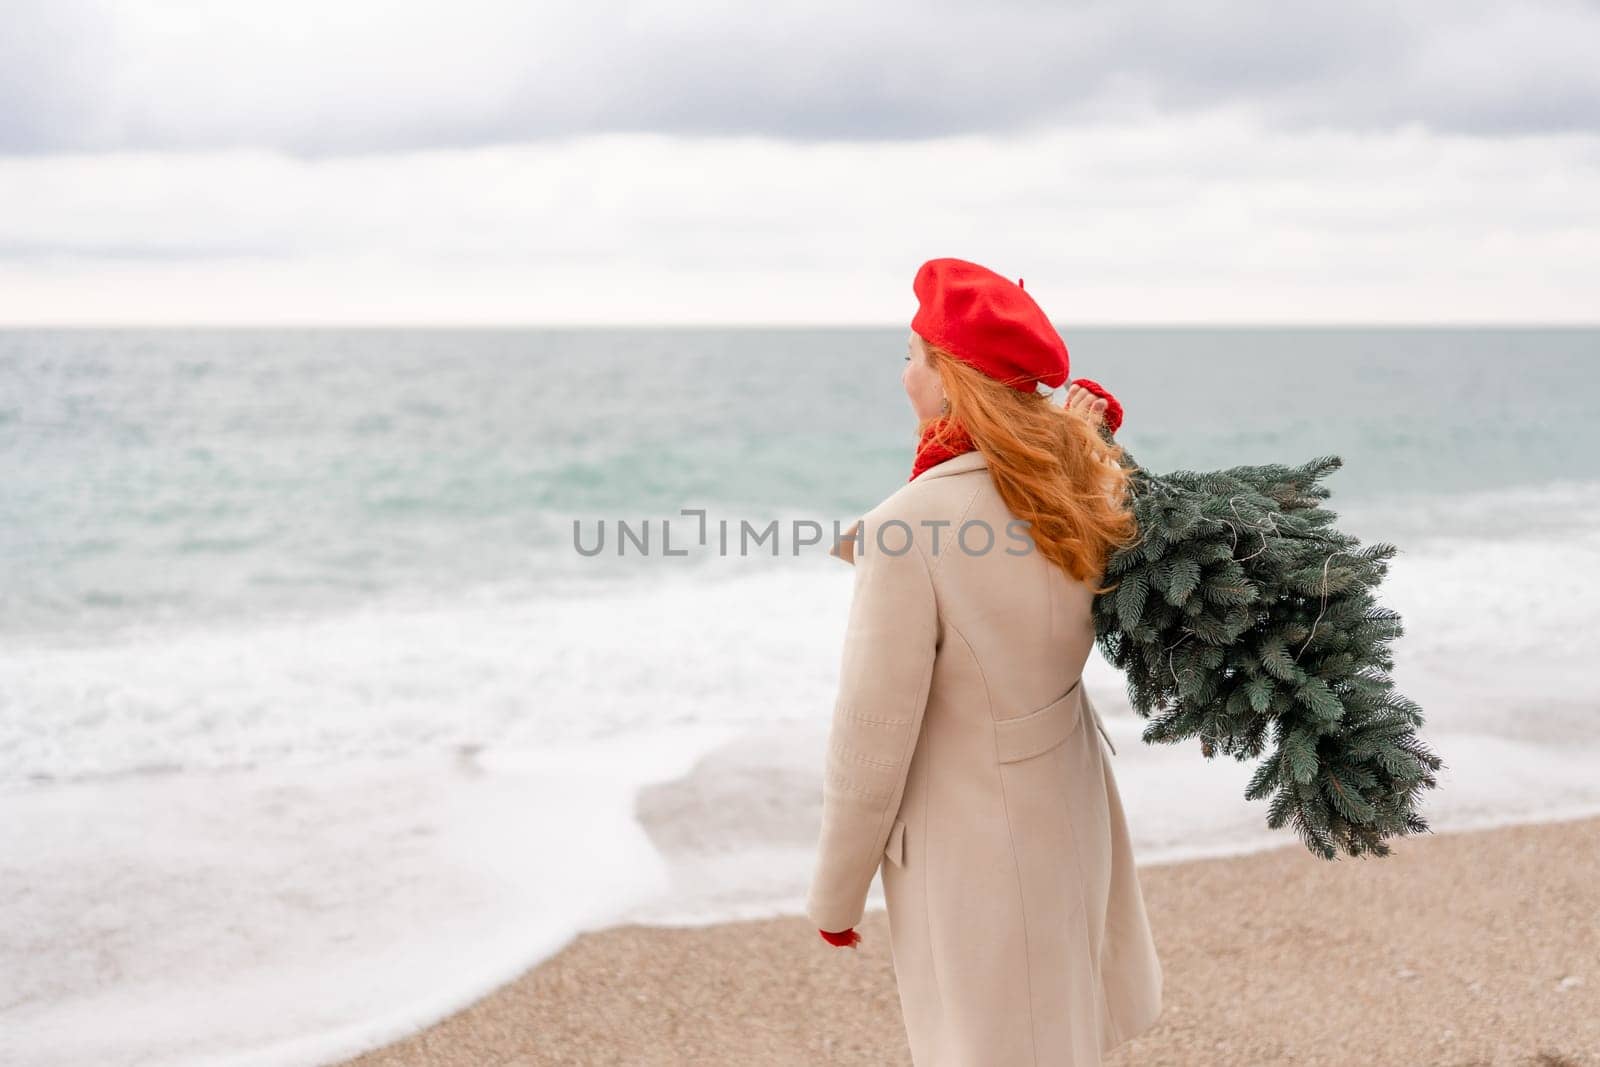 Redhead woman Christmas tree sea. Christmas portrait of a happy redhead woman walking along the beach and holding a Christmas tree on her shoulder. She is dressed in a light coat and a red beret